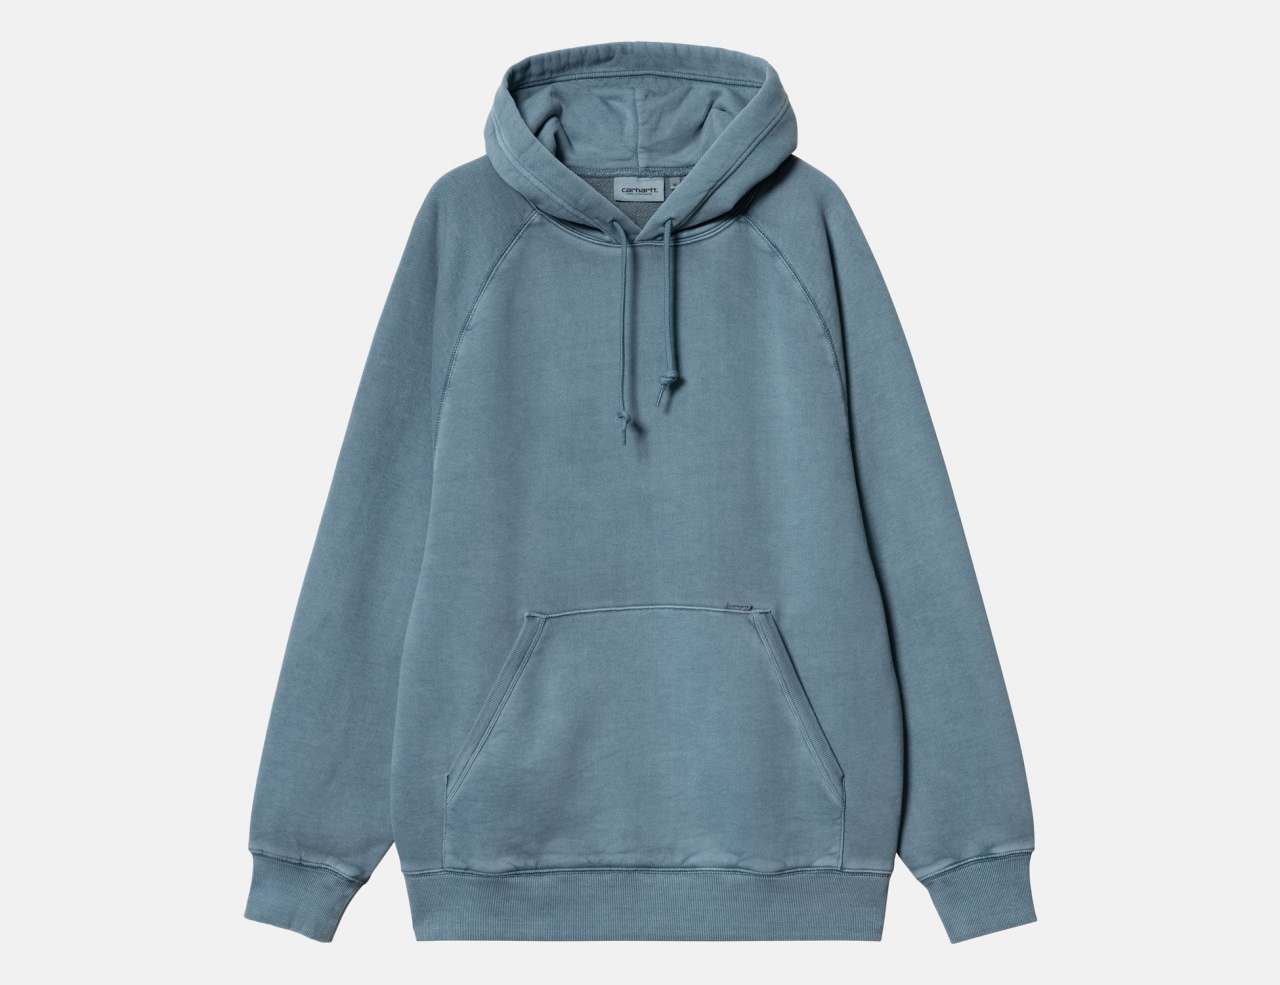 Carhartt WIP Hooded Taos Sweat - Vancouver Blue garment dyed